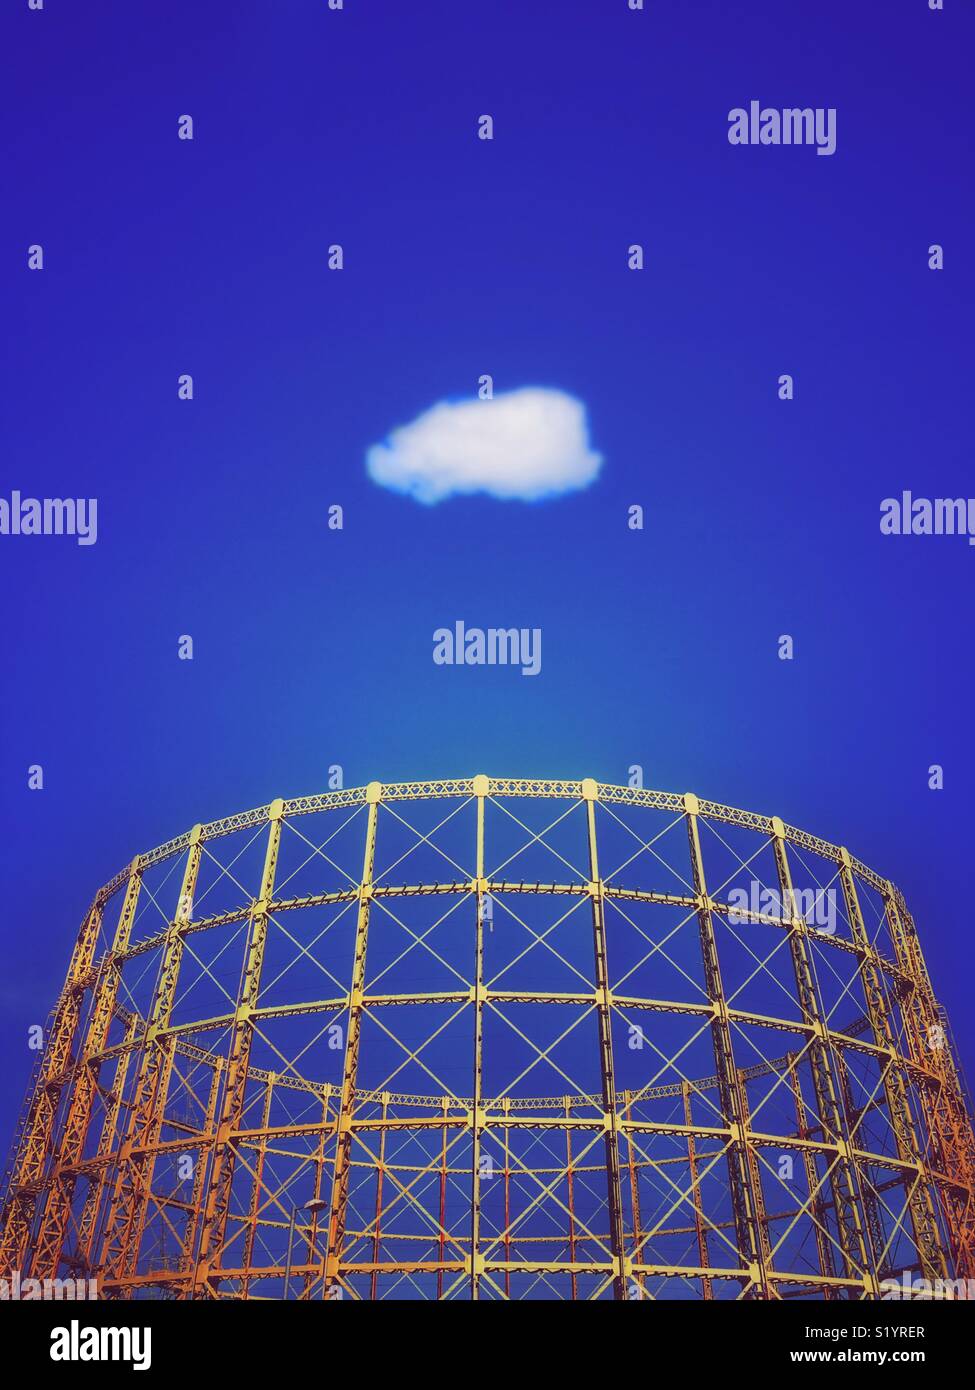 Gasometer structure against a vivid blue sky with solitary white cloud Stock Photo